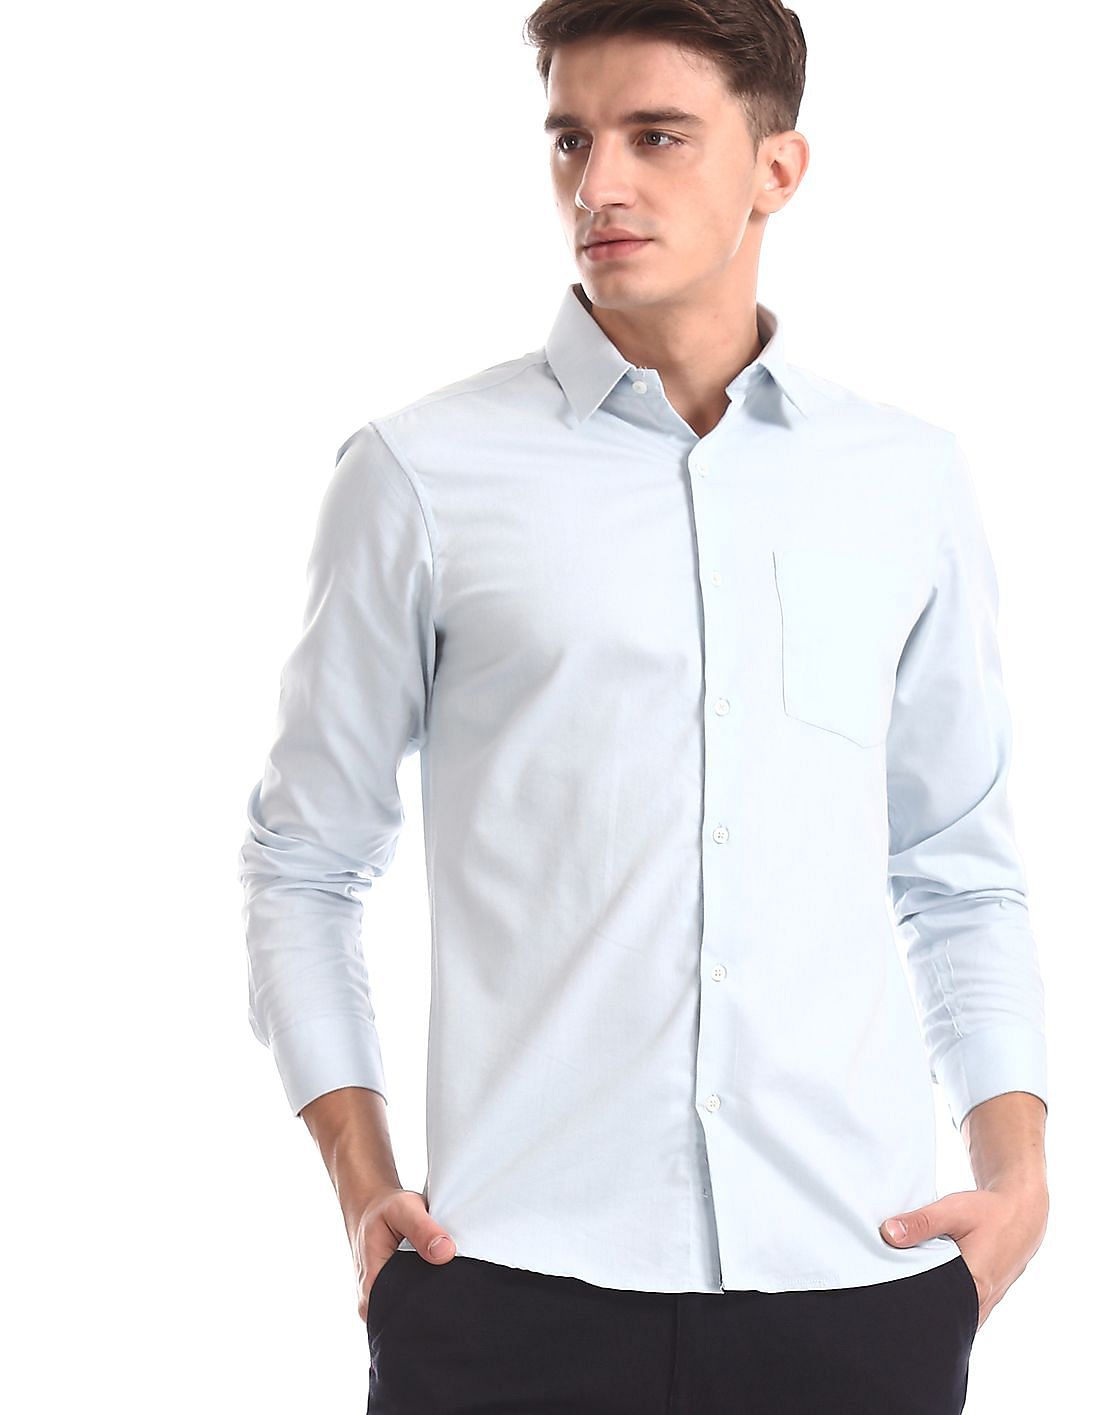 Buy Excalibur Blue Mitered Cuff French Placket Shirt - NNNOW.com